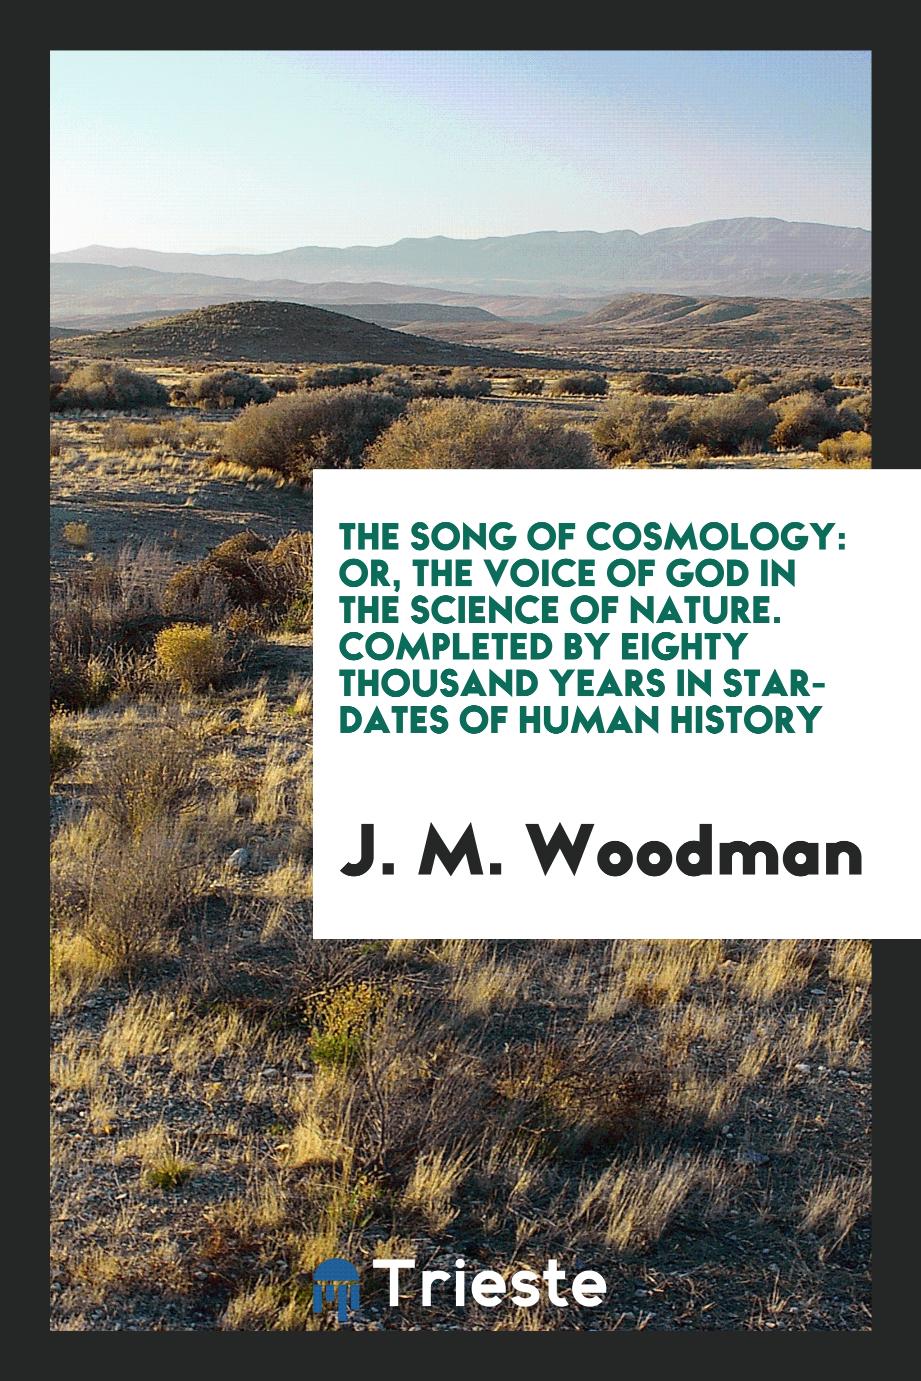 The song of cosmology: or, The voice of God in the science of nature. Completed by eighty thousand years in star-dates of human history